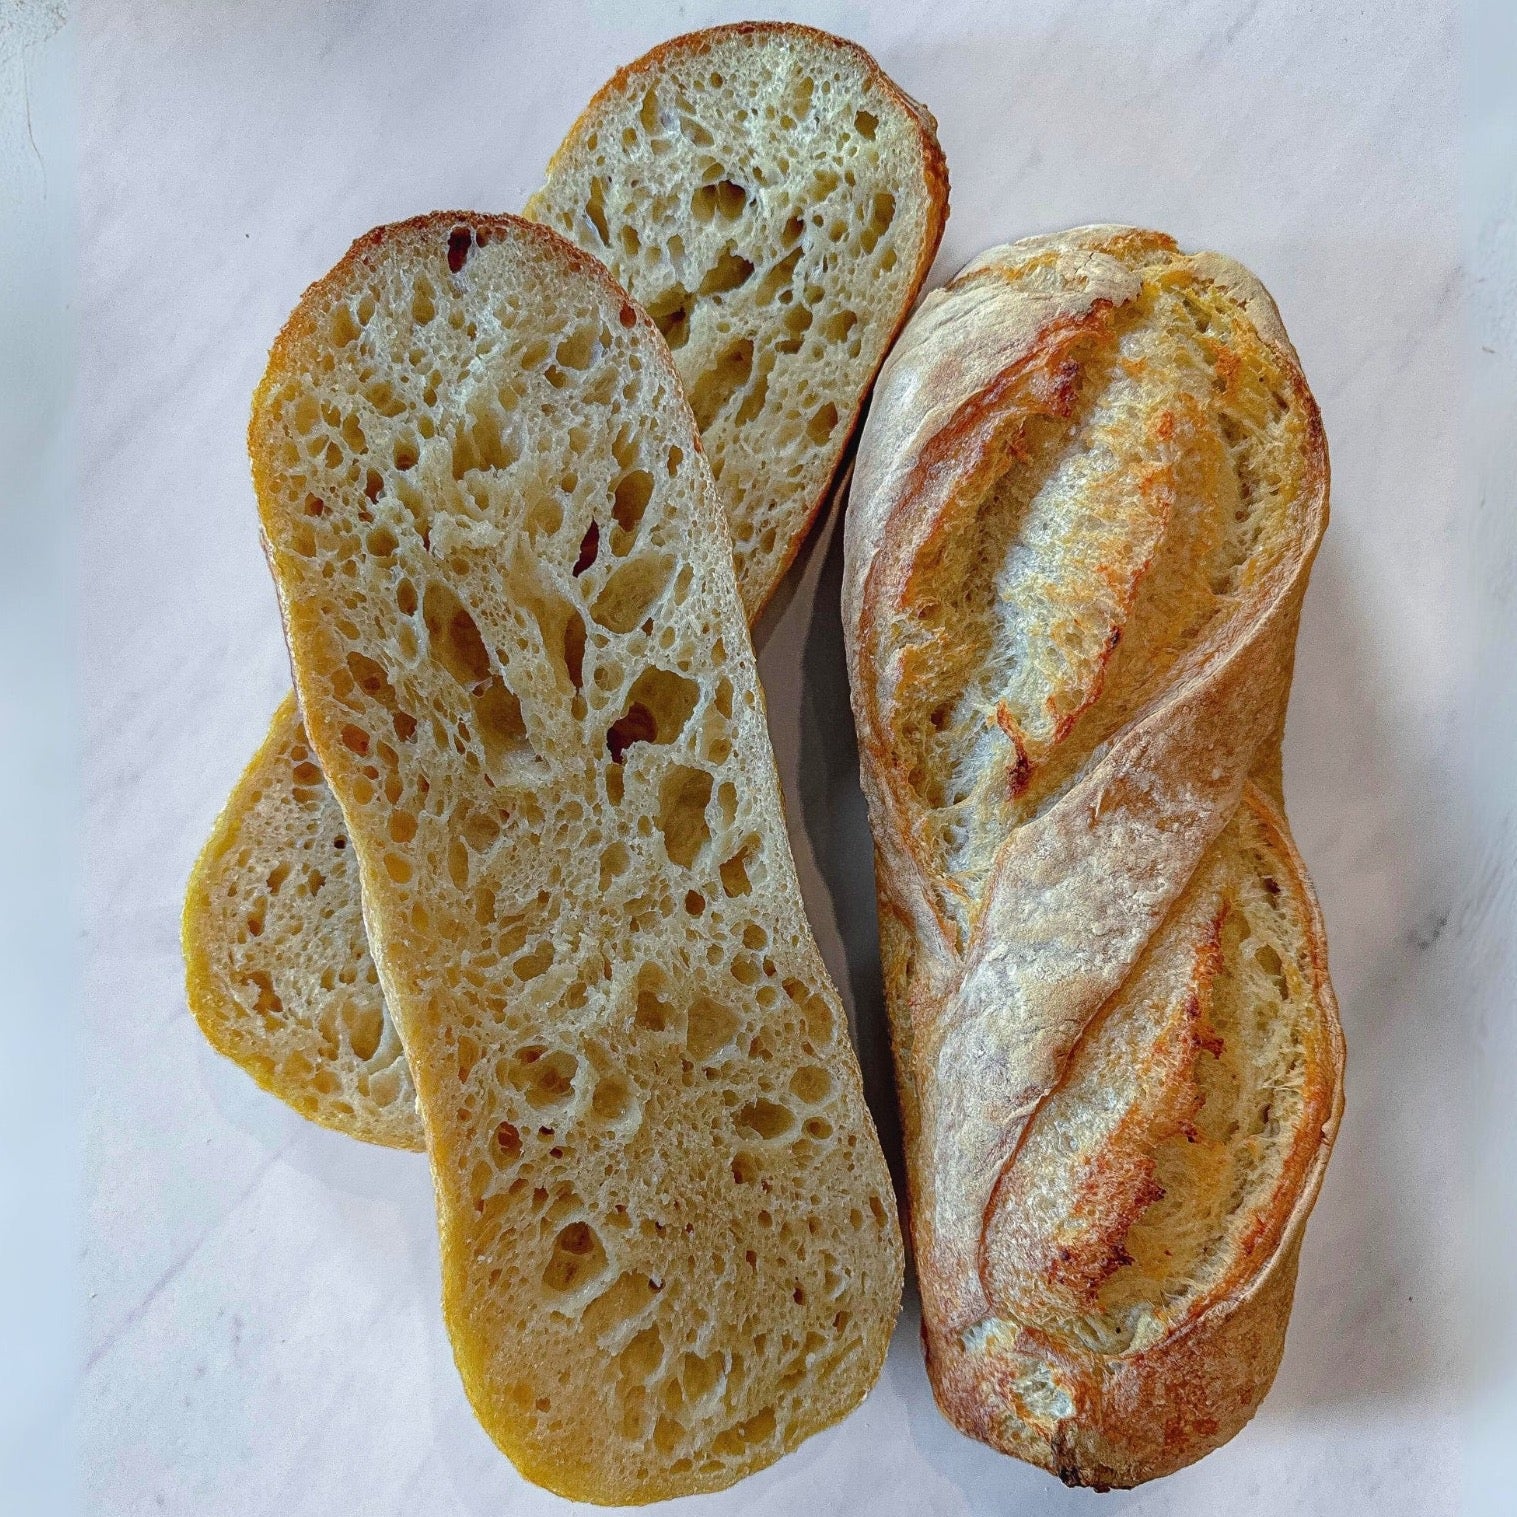 Pack of 2 Sourdough loaf (White flour)